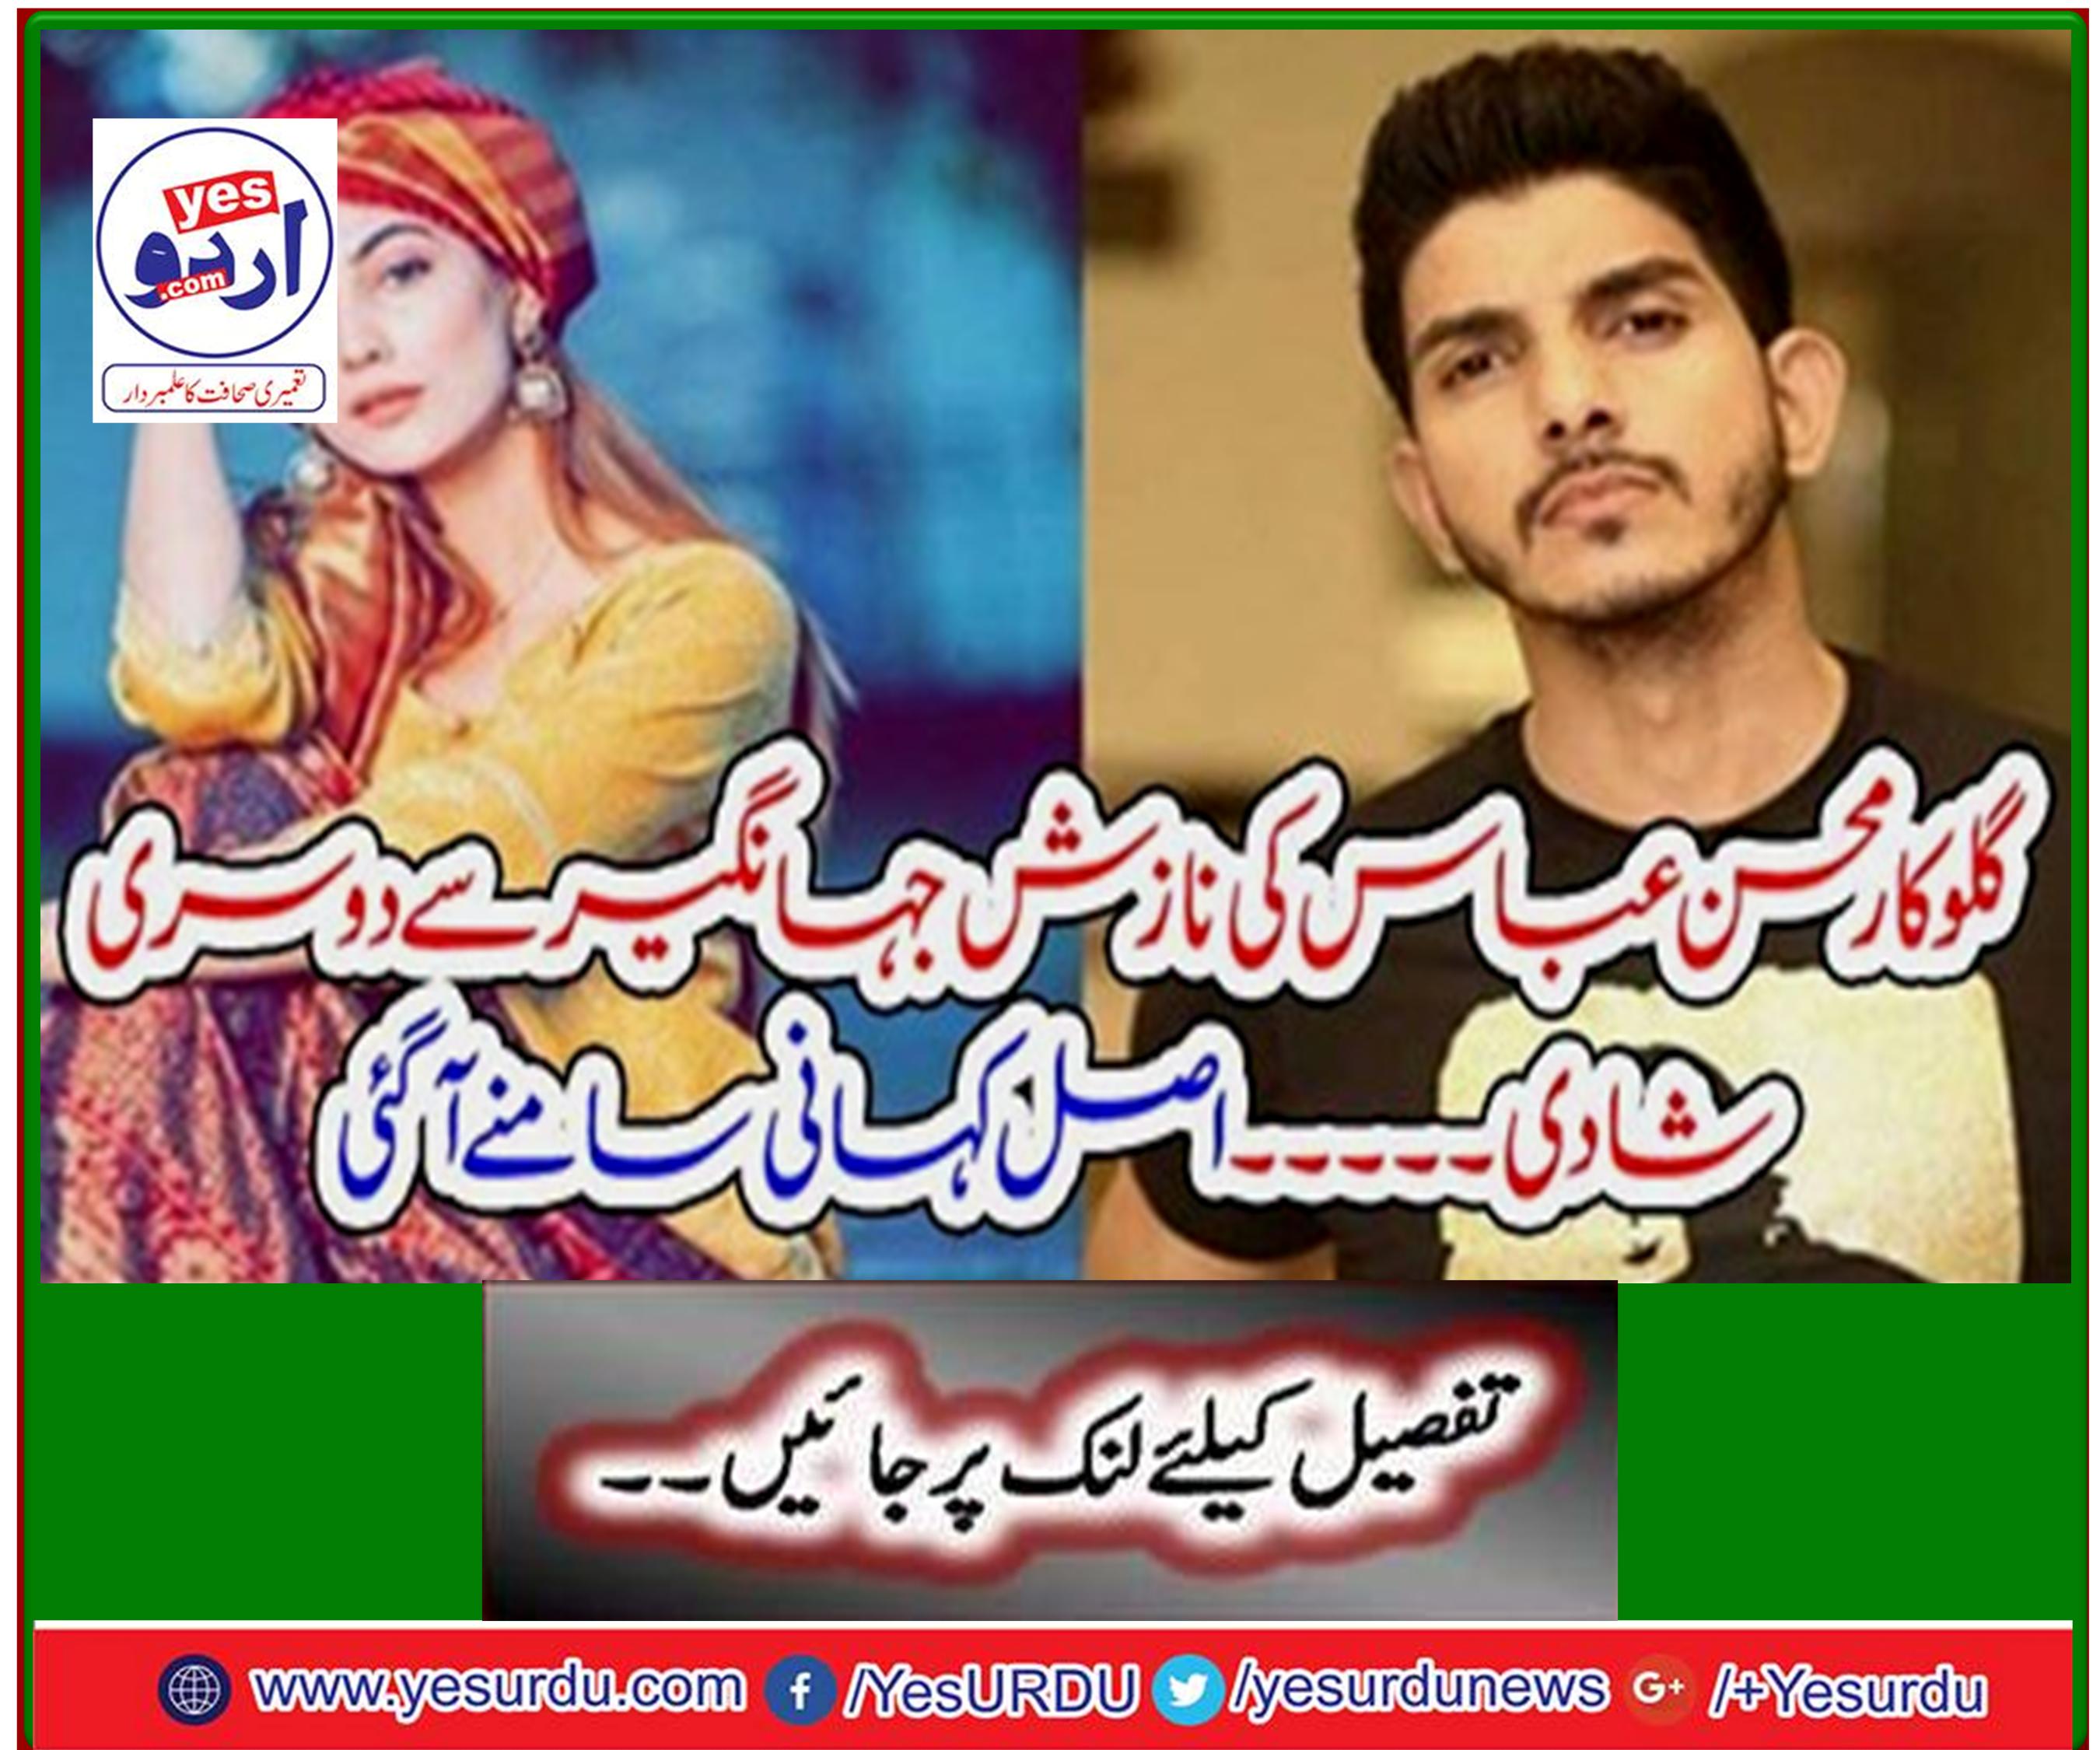 Singer Mohsin Abbas's second marriage to Nazish Jahangir - The real story unfolds